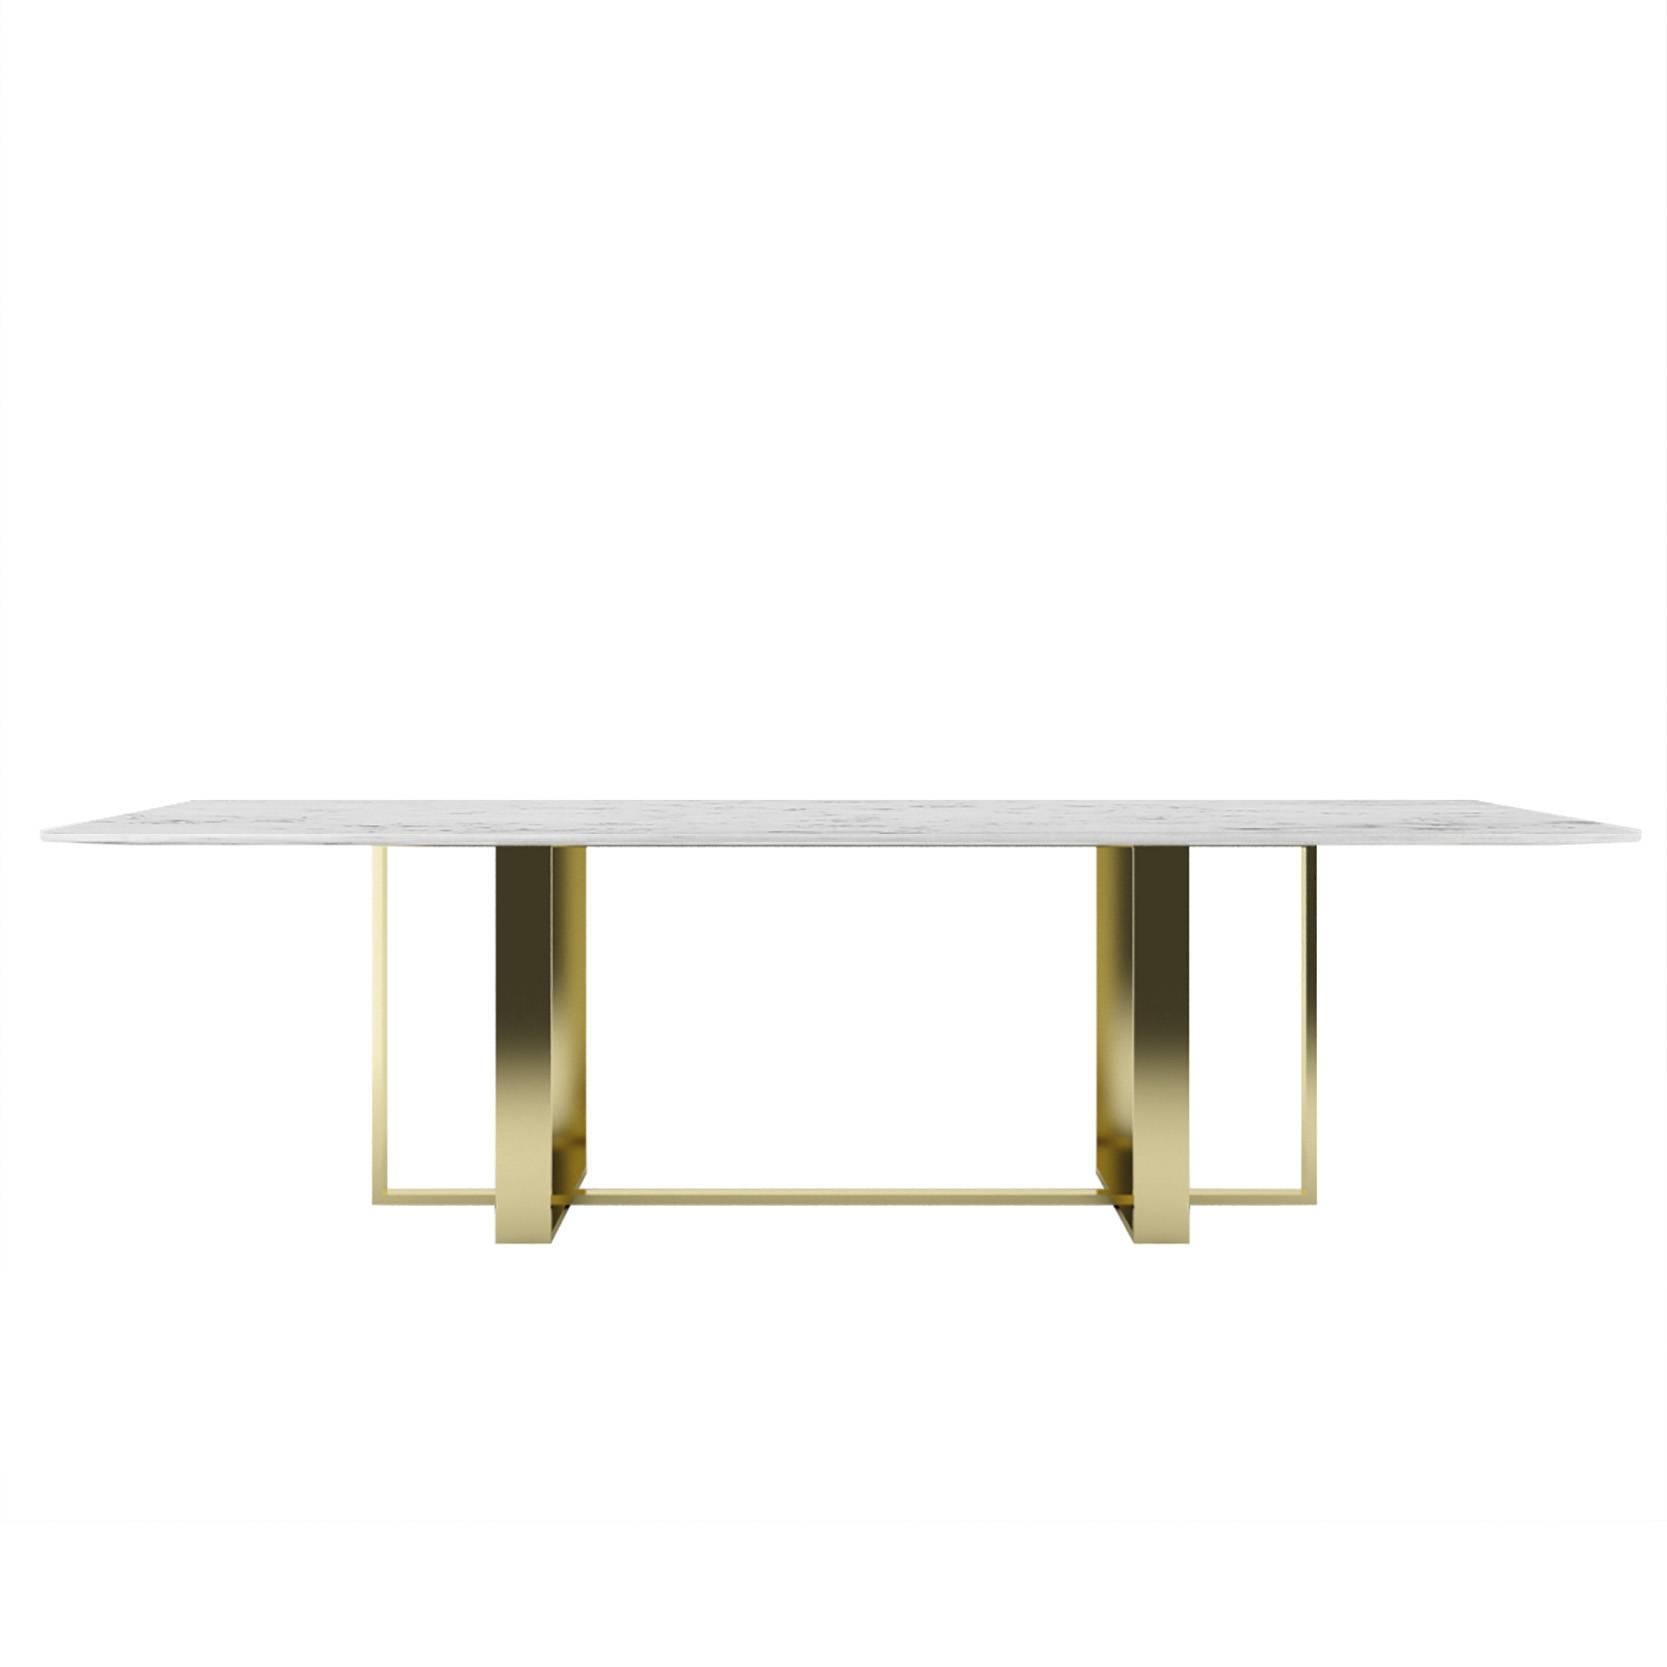 Italian Modern Dining Table Black and White Made in Italy For Sale